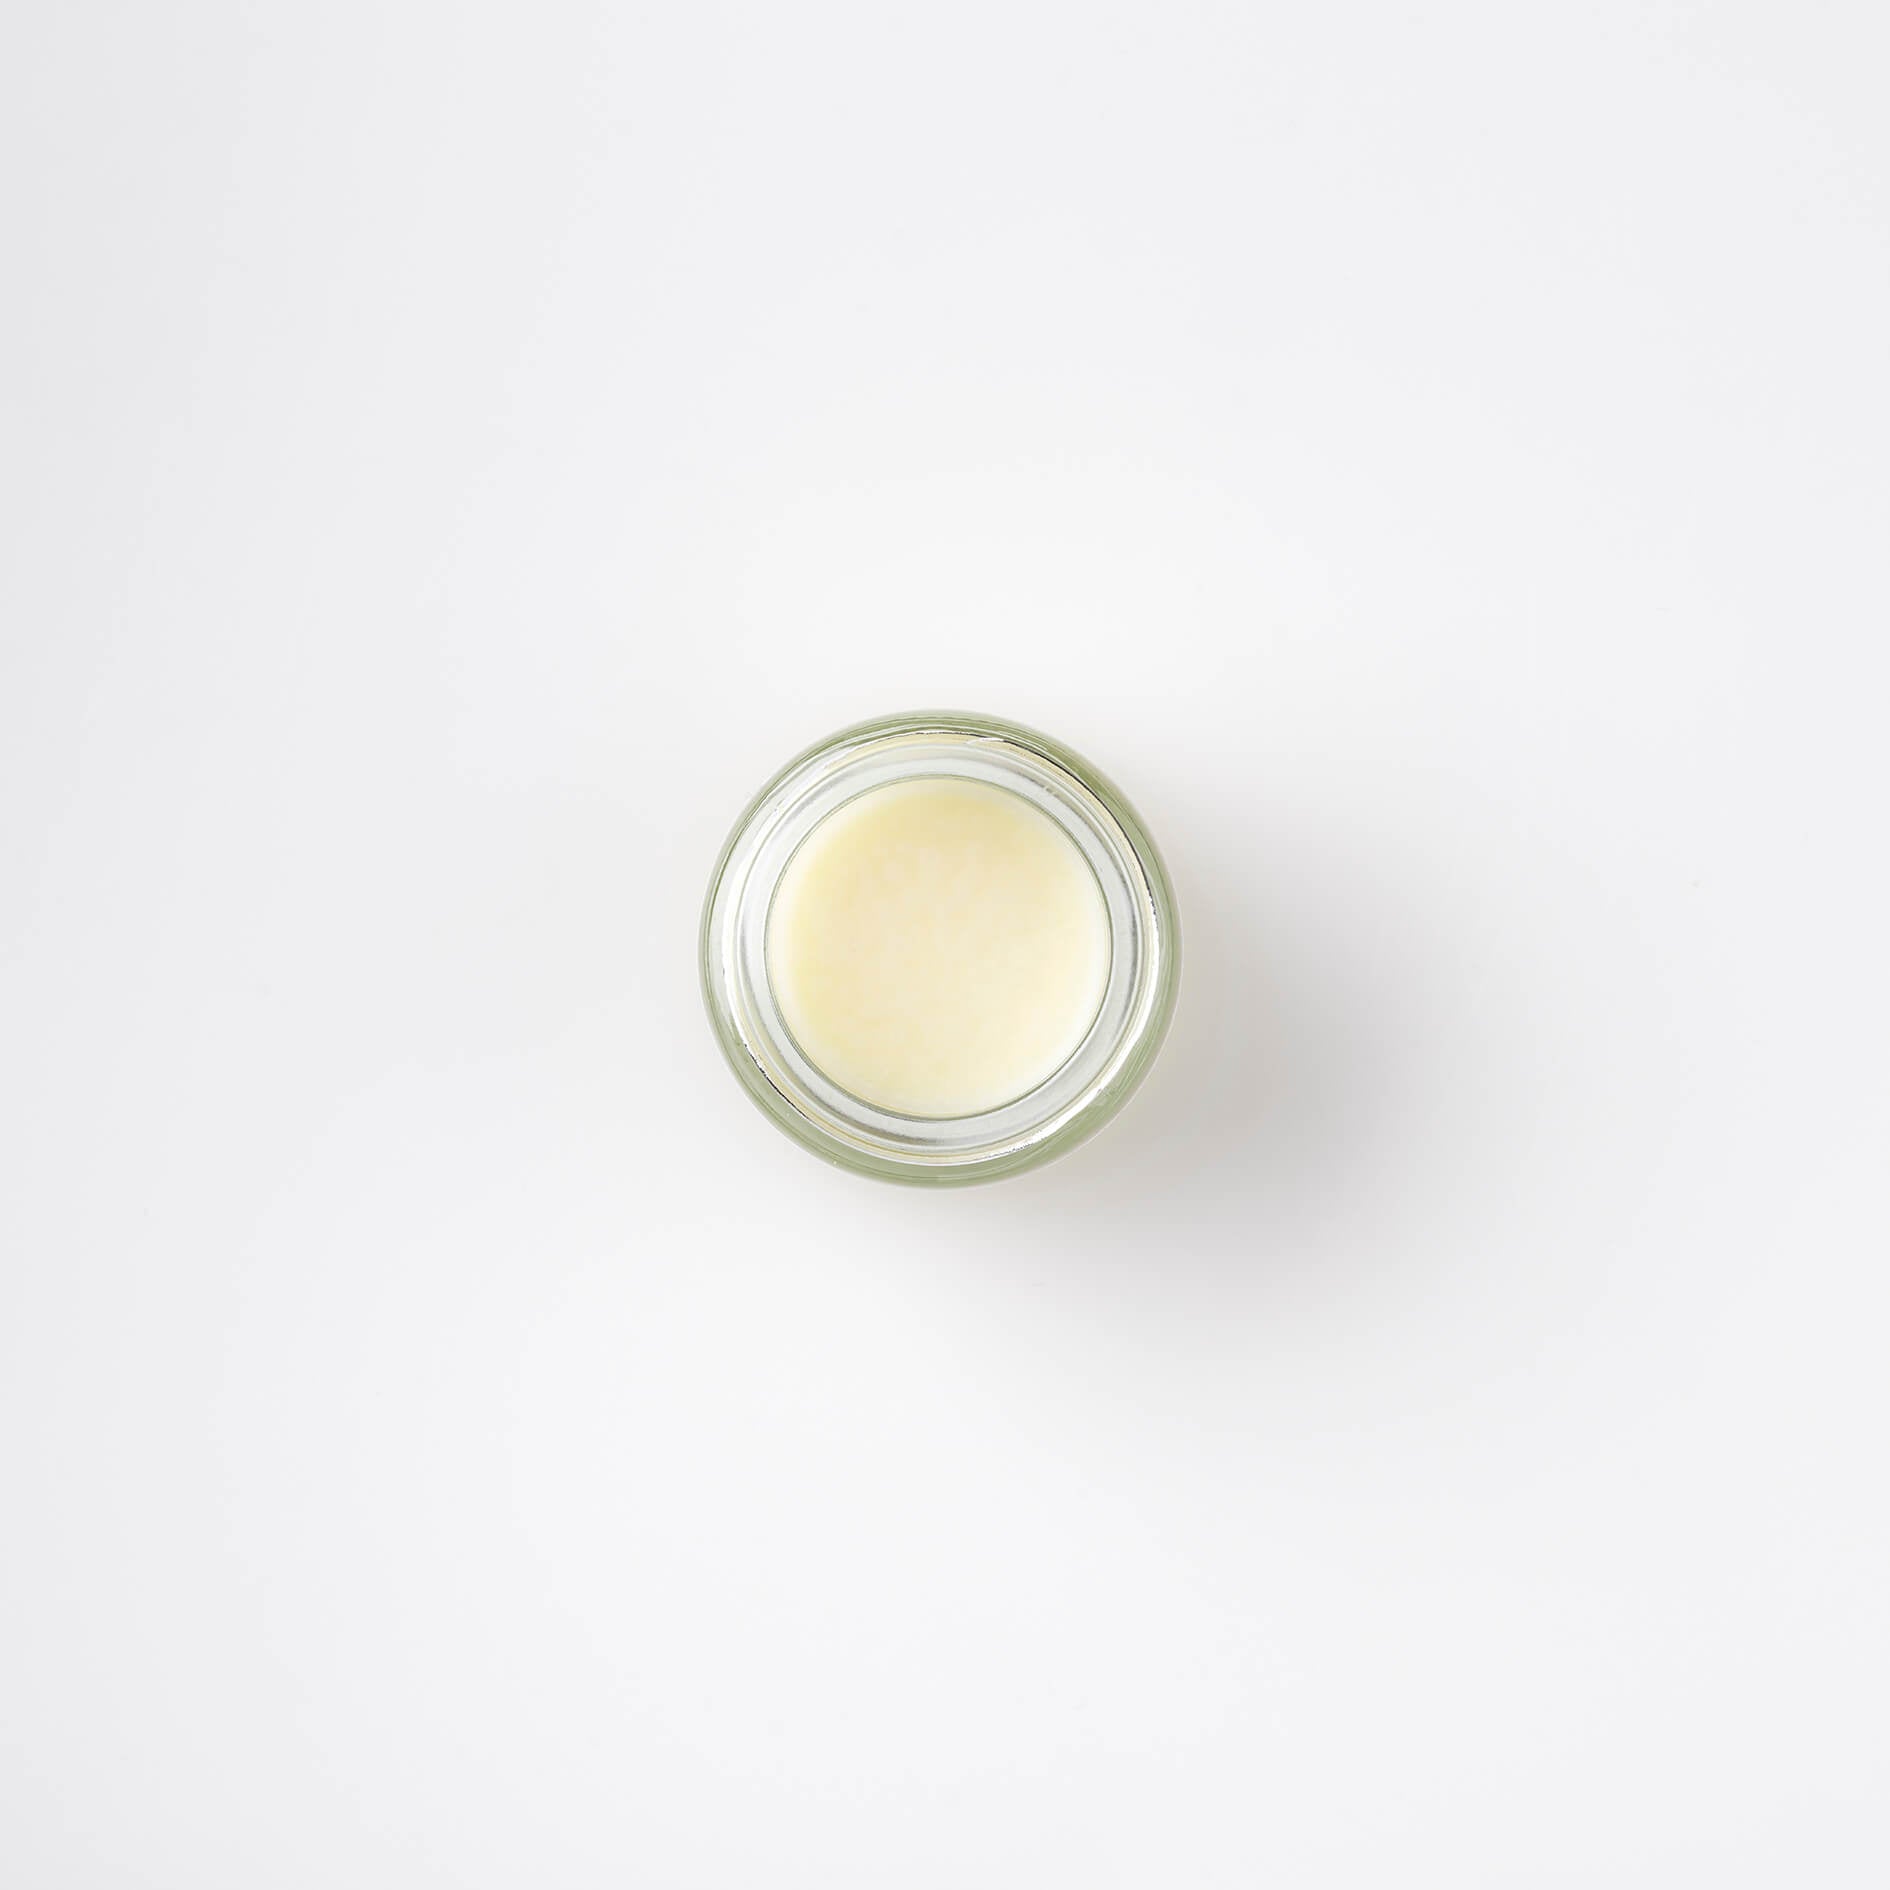 top view of a lime and mint Bristolmade lip balm, in a round, clear glass jar. The product is an off white, glossy colour, showing the smooth properties of the product.